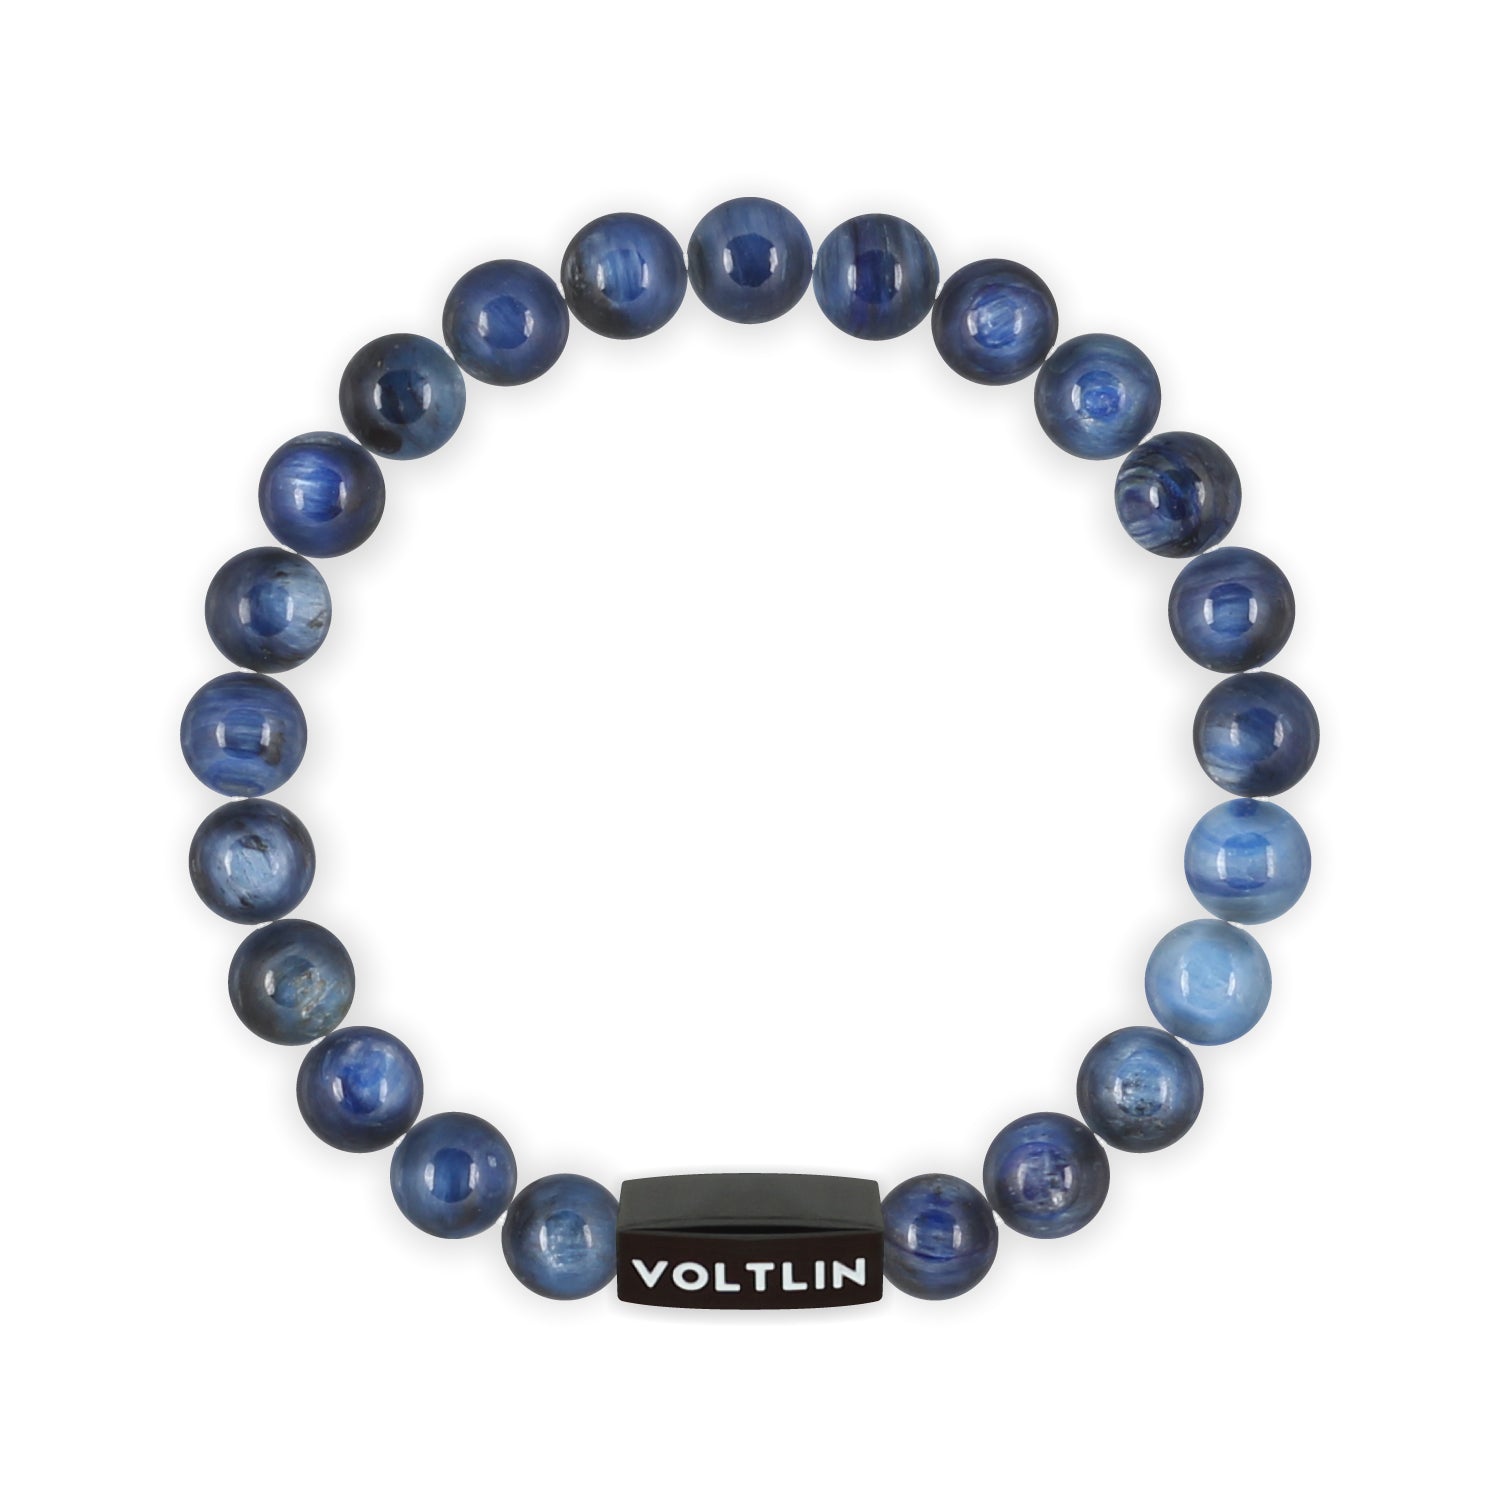 Front view of an 8mm Kyanite crystal beaded stretch bracelet with black stainless steel logo bead made by Voltlin